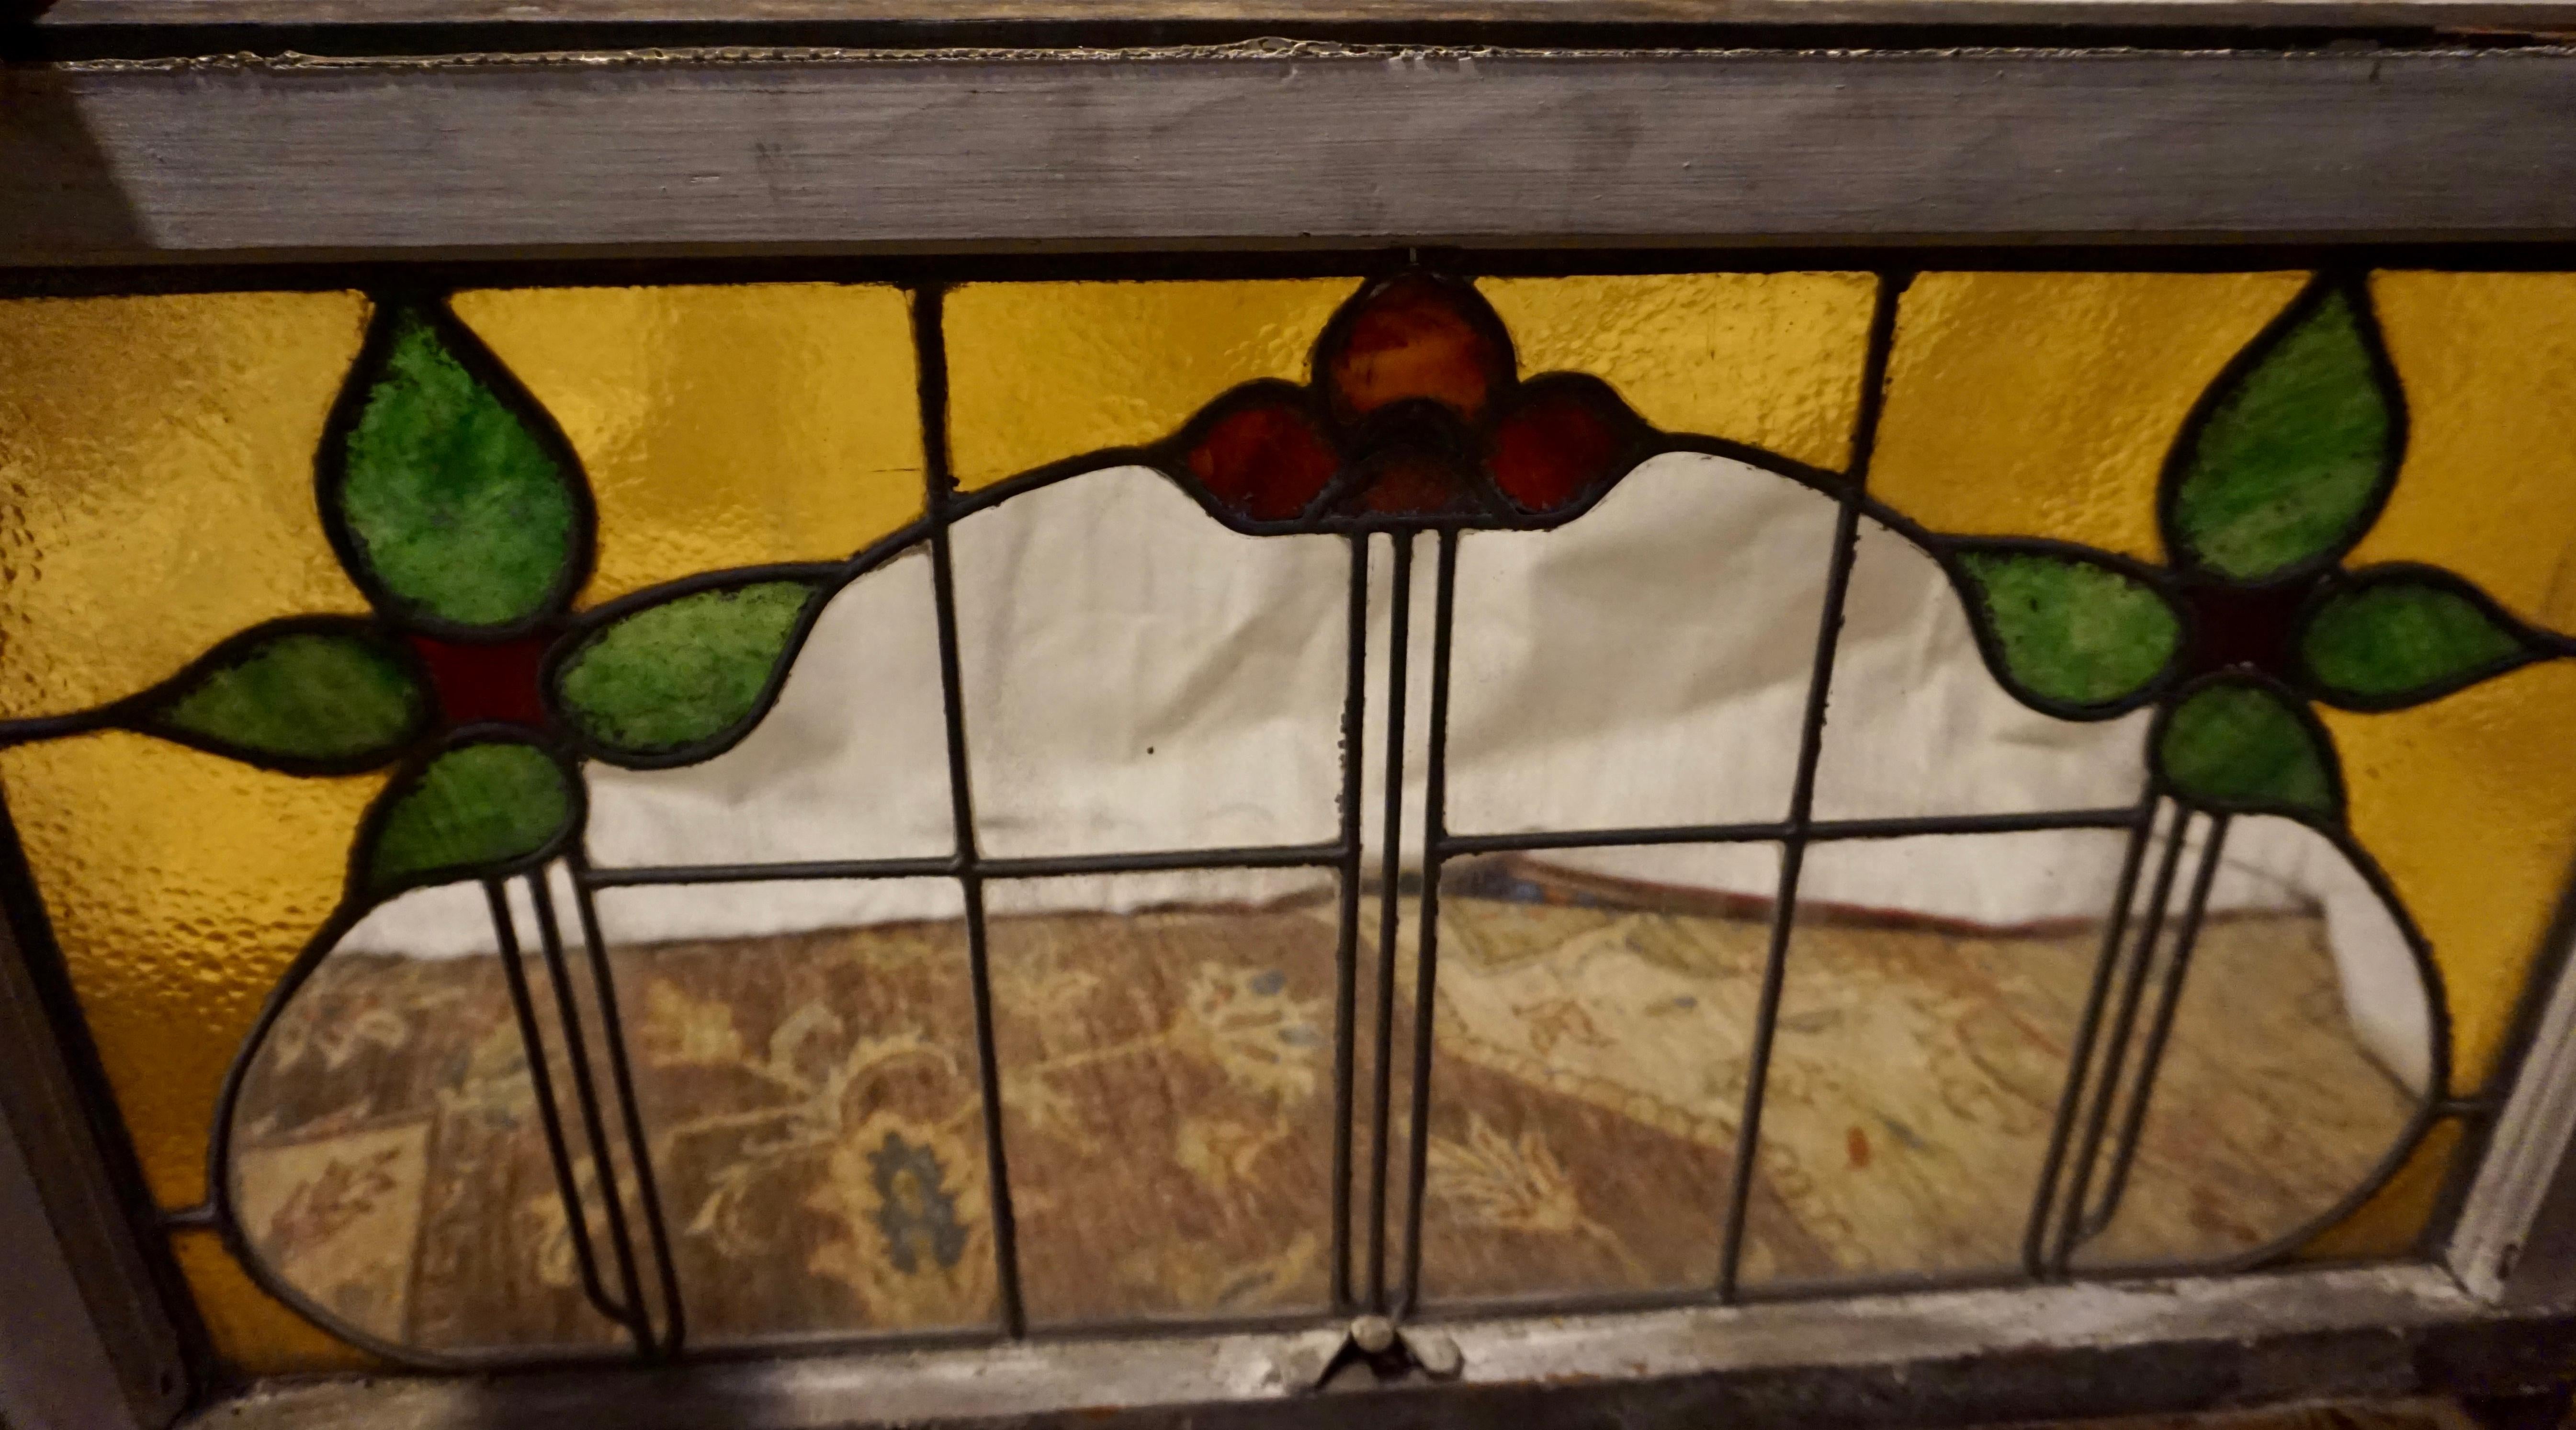 Large Arts & Crafts Stained Glass Window with Floral Theme In Good Condition For Sale In Vancouver, British Columbia